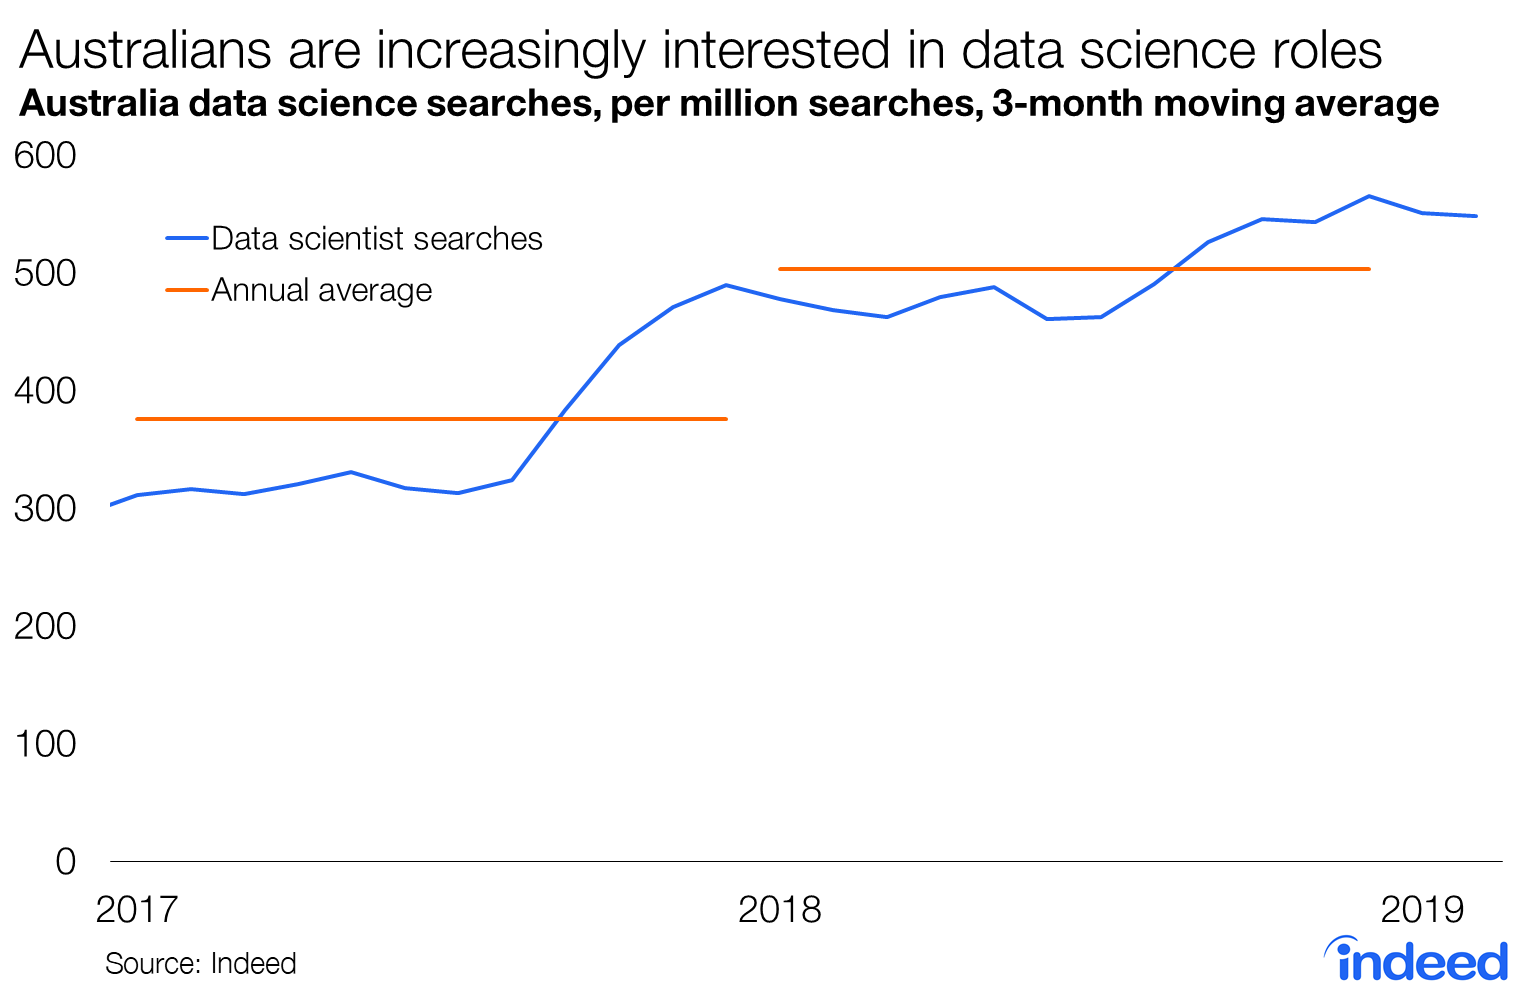 Australians are increasingly interested in data science roles